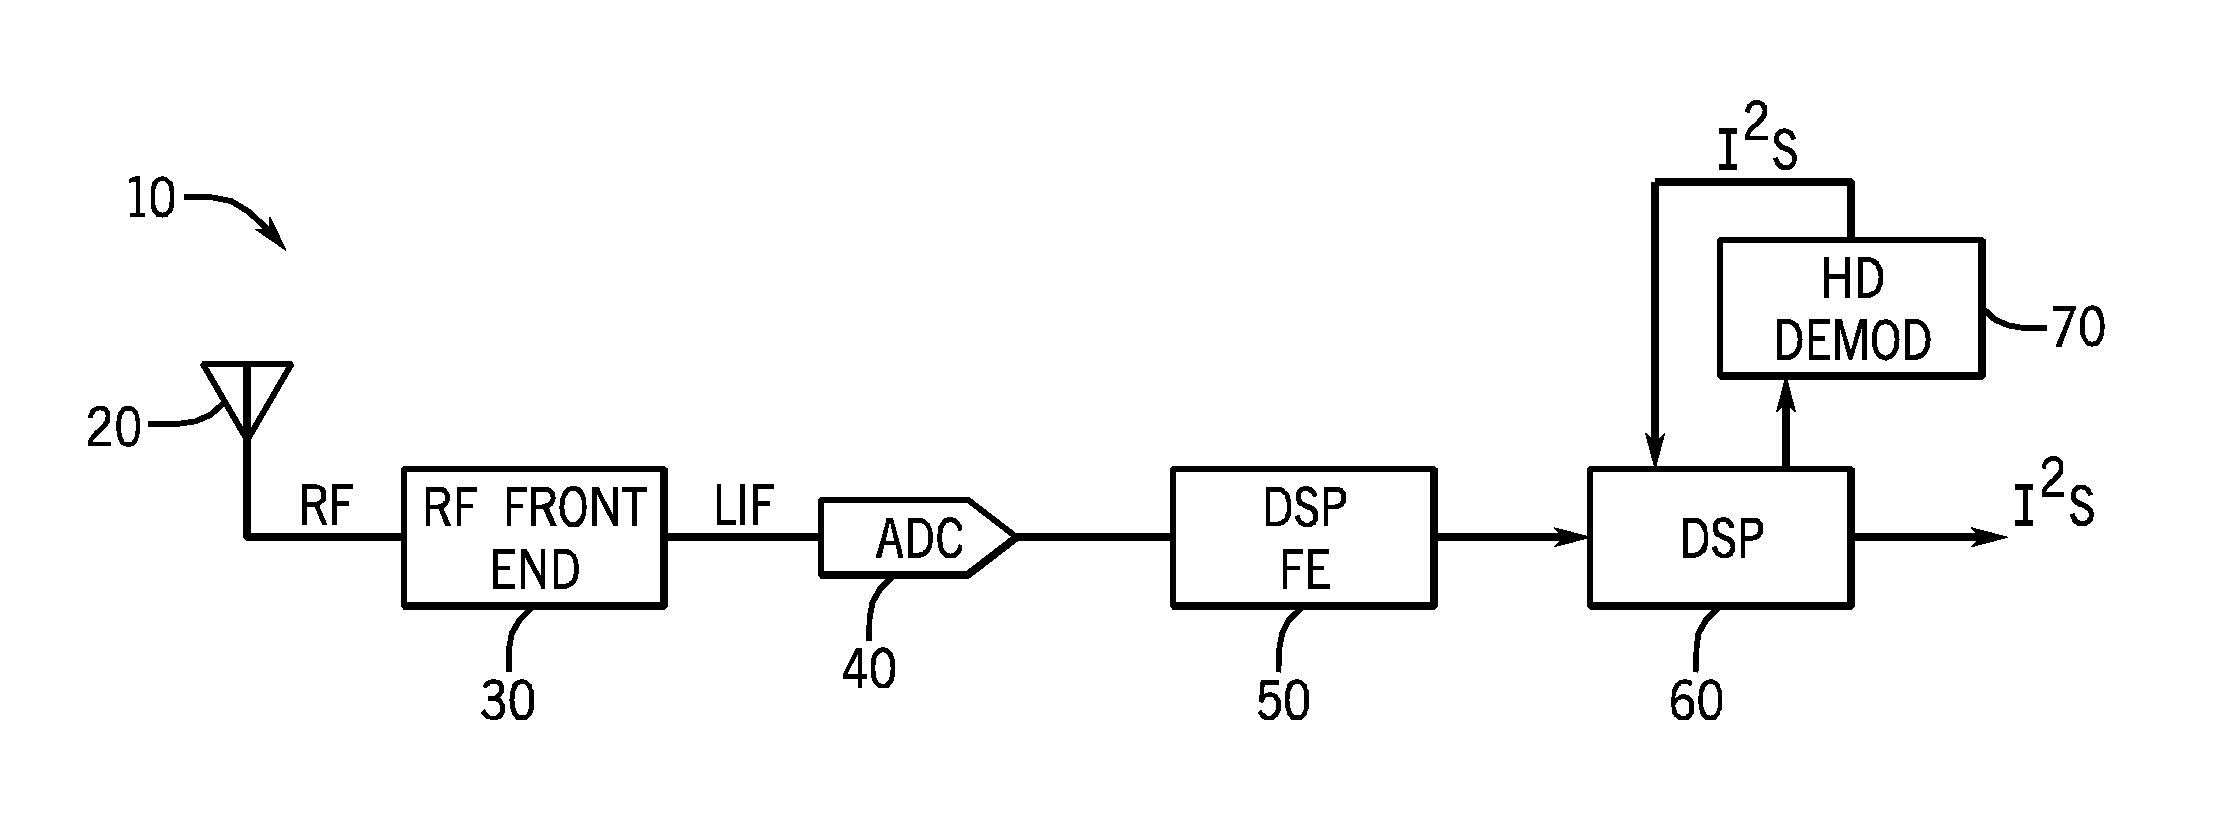 Controlling Power Consumption In A Radio Tuner